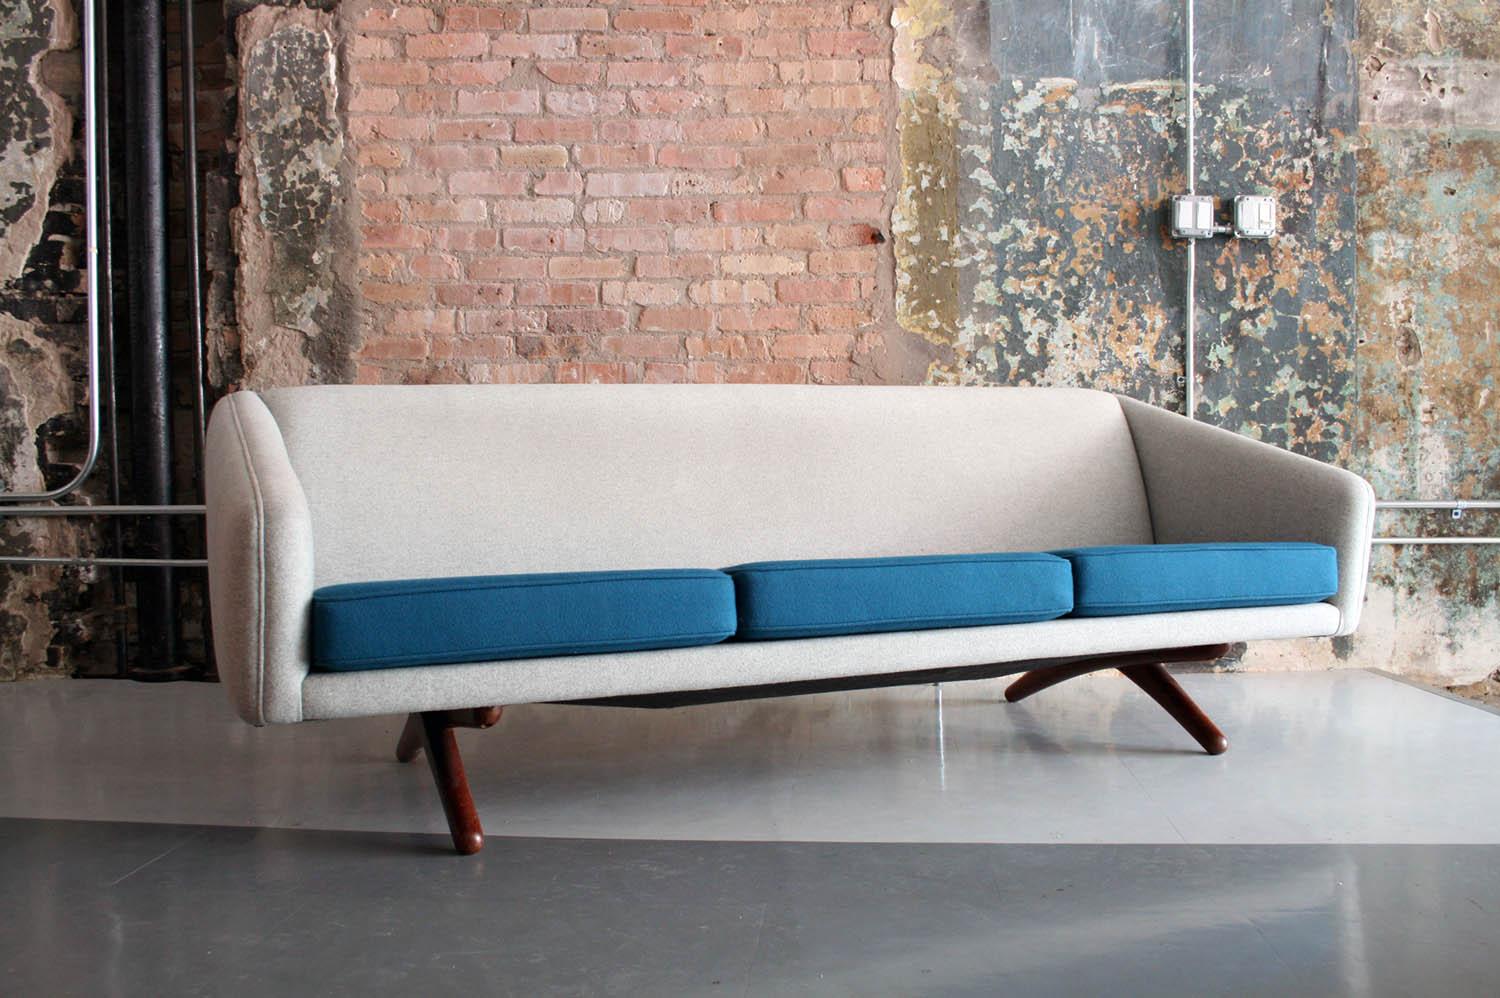 Beautiful iconic design.

Perfect condition.
Reupholstered in two-tone felt fabric.